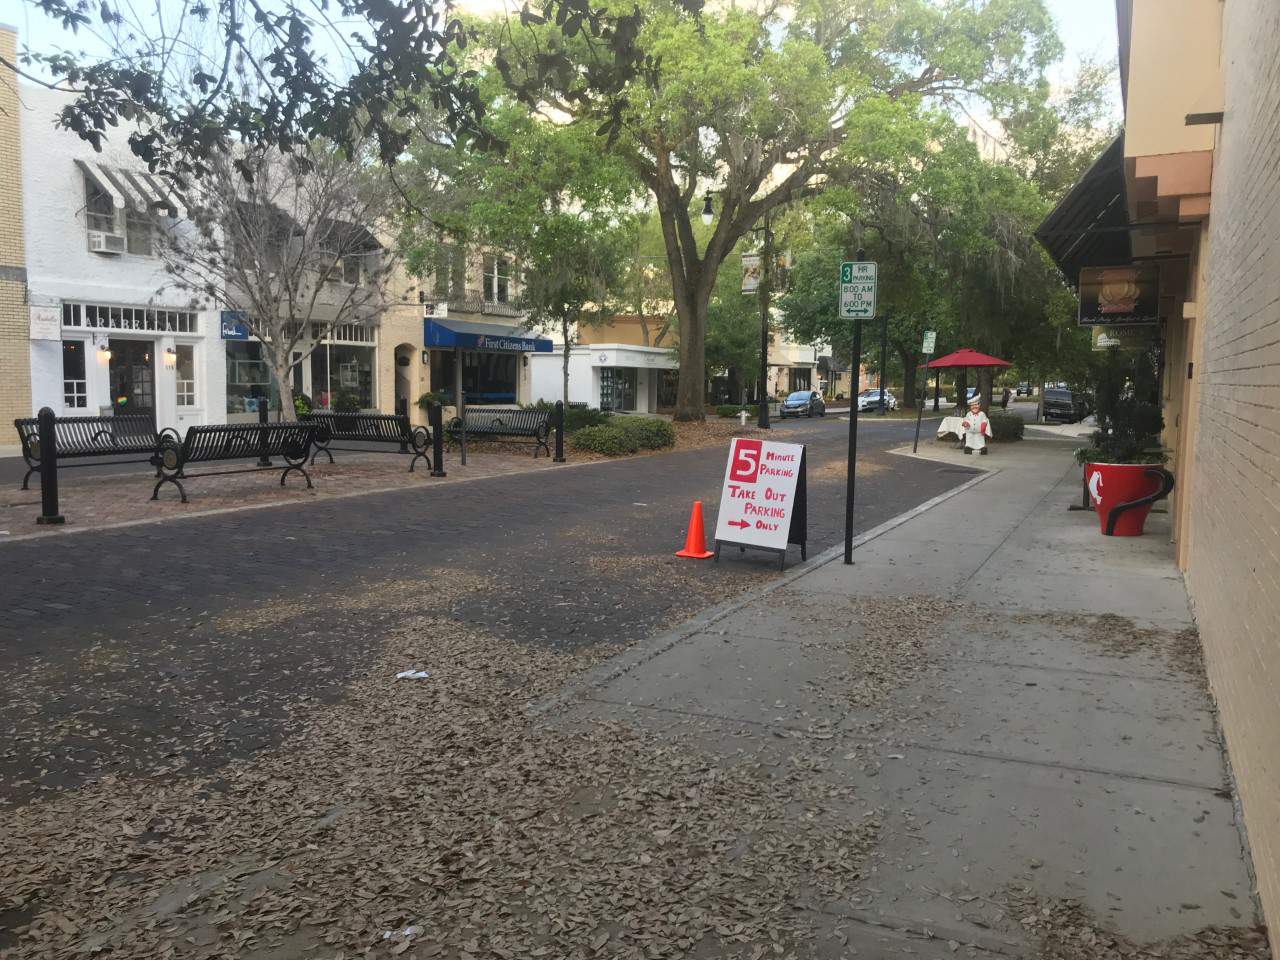 Winter Park small businesses feeling impacts of mandated closures amid virus outbreak